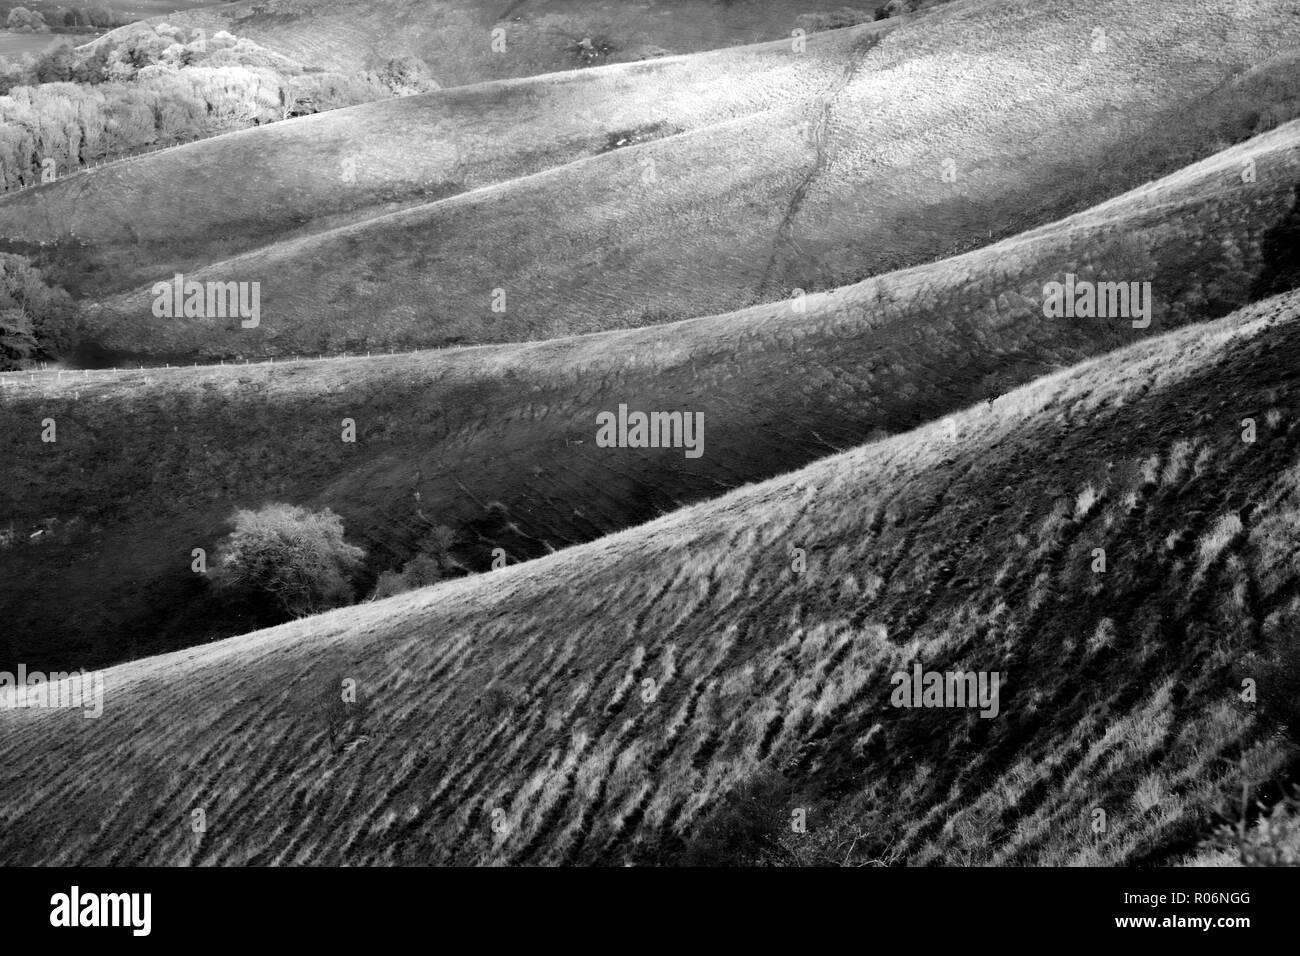 Black and white photograph of sussex rolling hills, the light is low casting high lights and shadows on to of the hills, there are four folds of hills Stock Photo